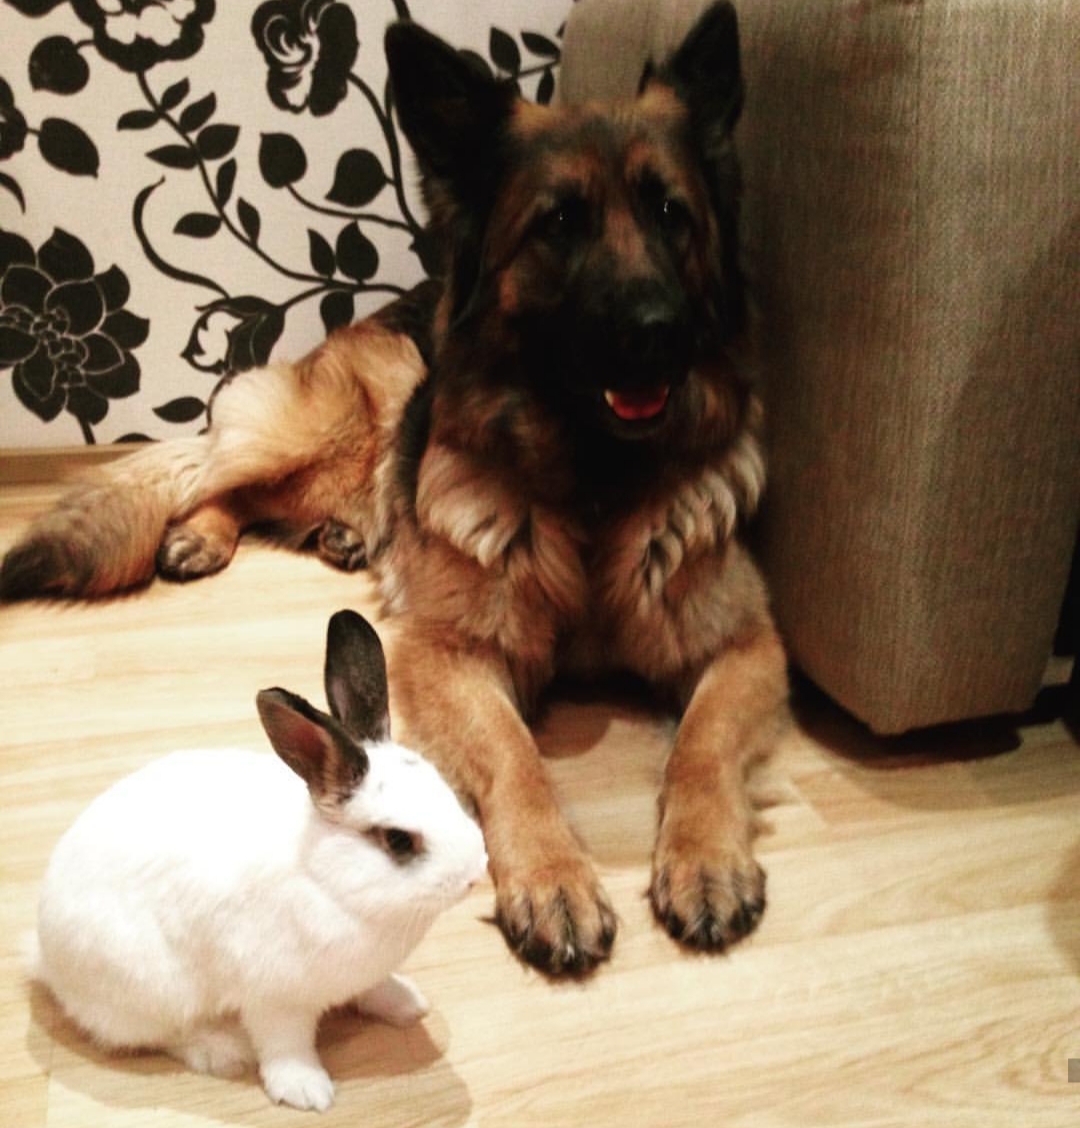 German Shepherd dog lying down on the floor with a Rabbit in front of him